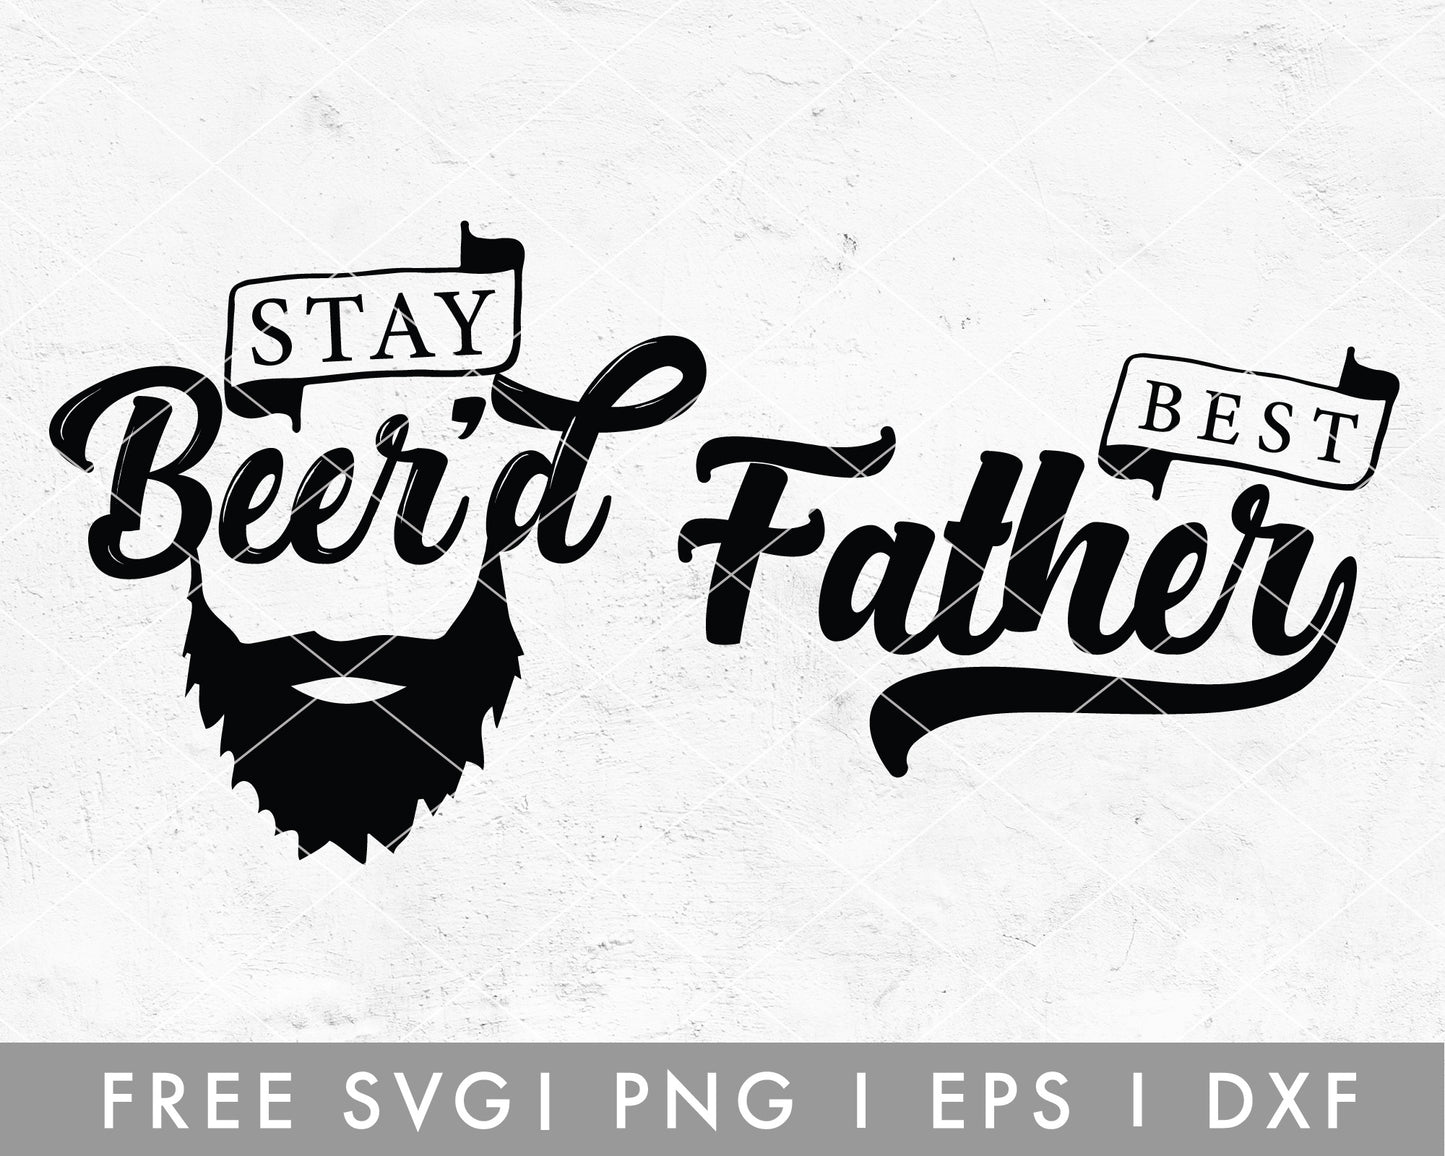 FREE FREE Dad SVG | Best Father Cut File for Cricut, Cameo Silhouette | Free SVG Cut File